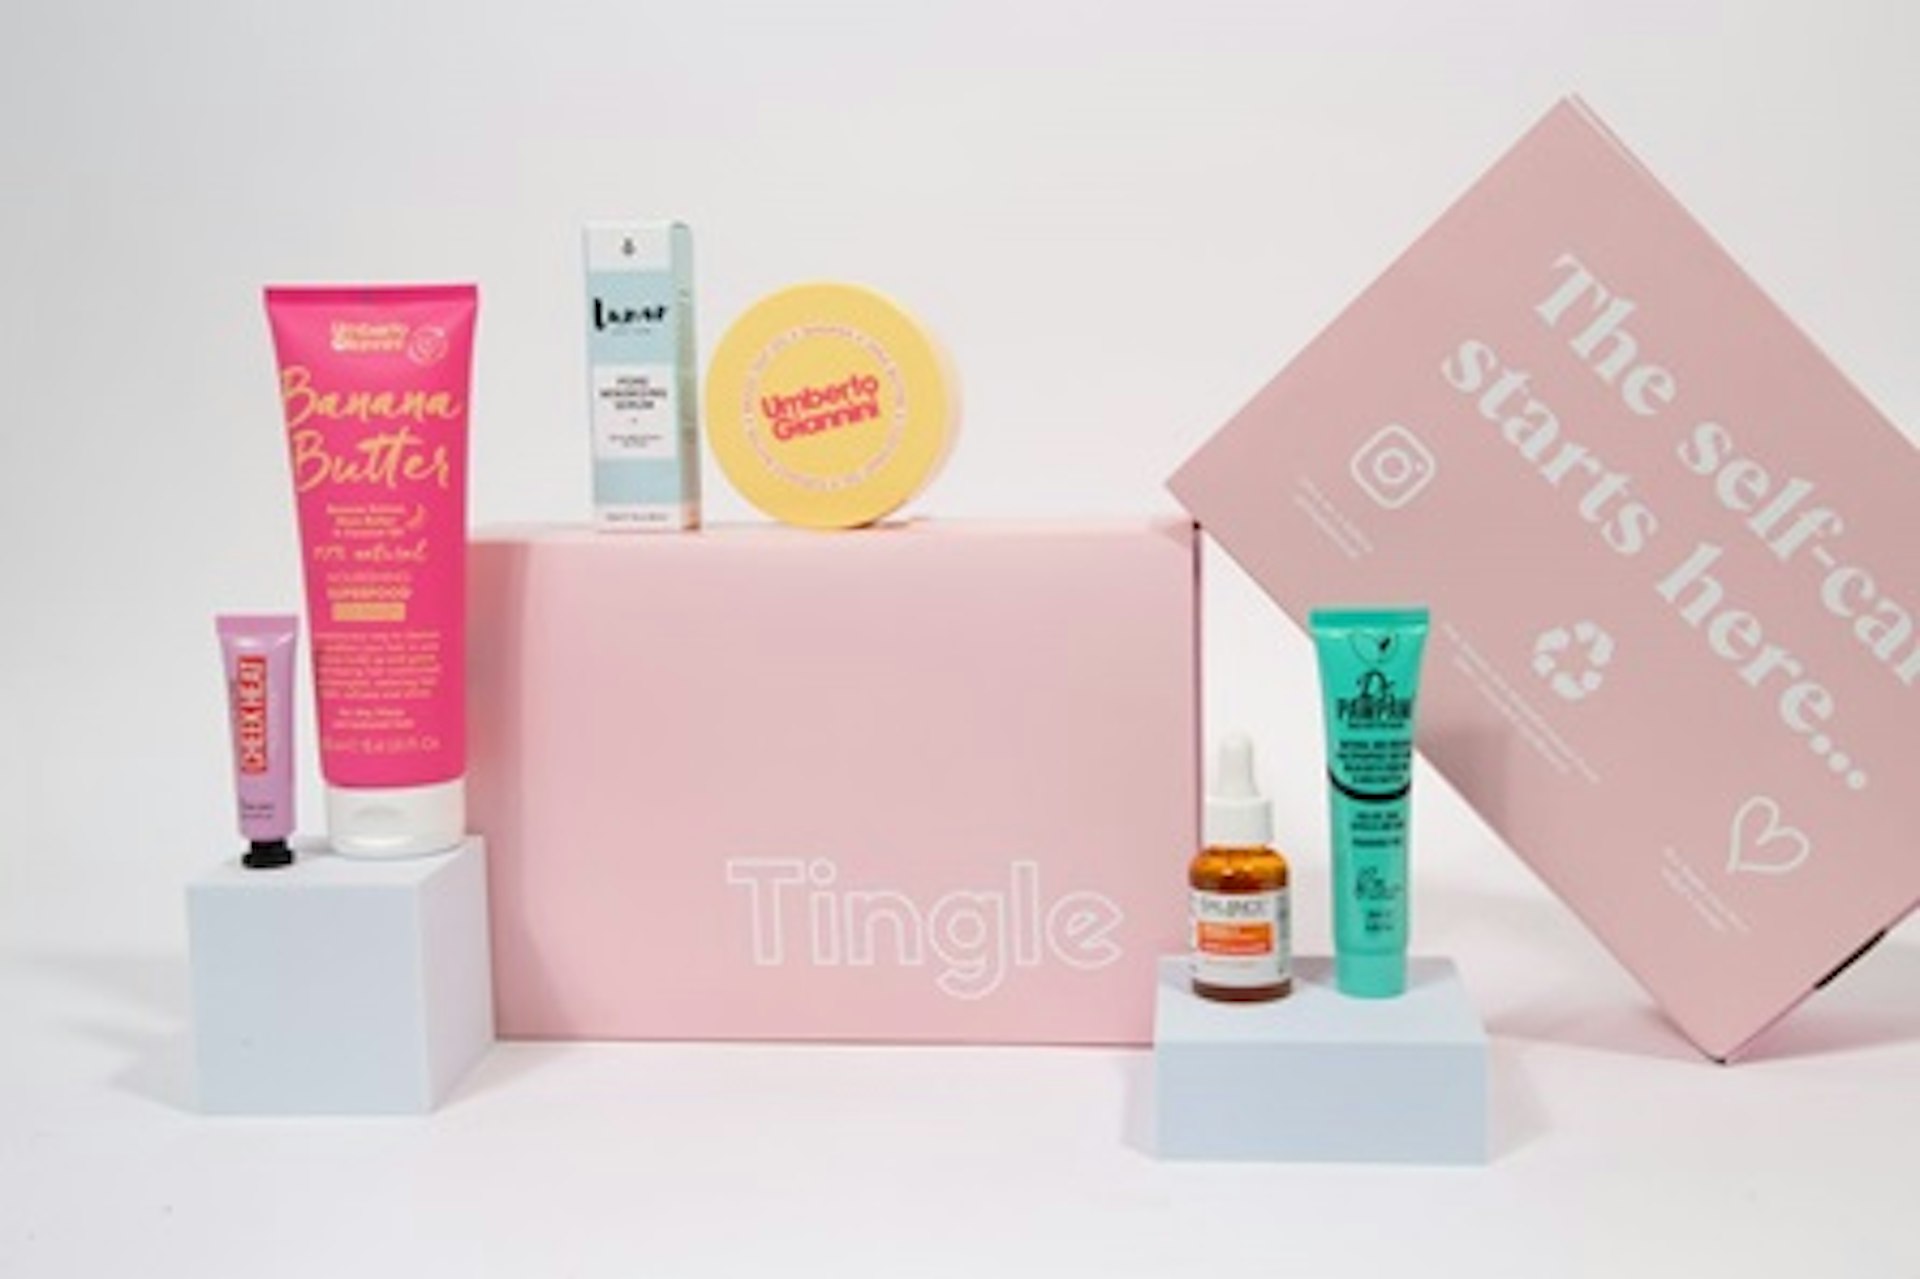 Tingle Limited Edition Self-Care Mystery Box 1